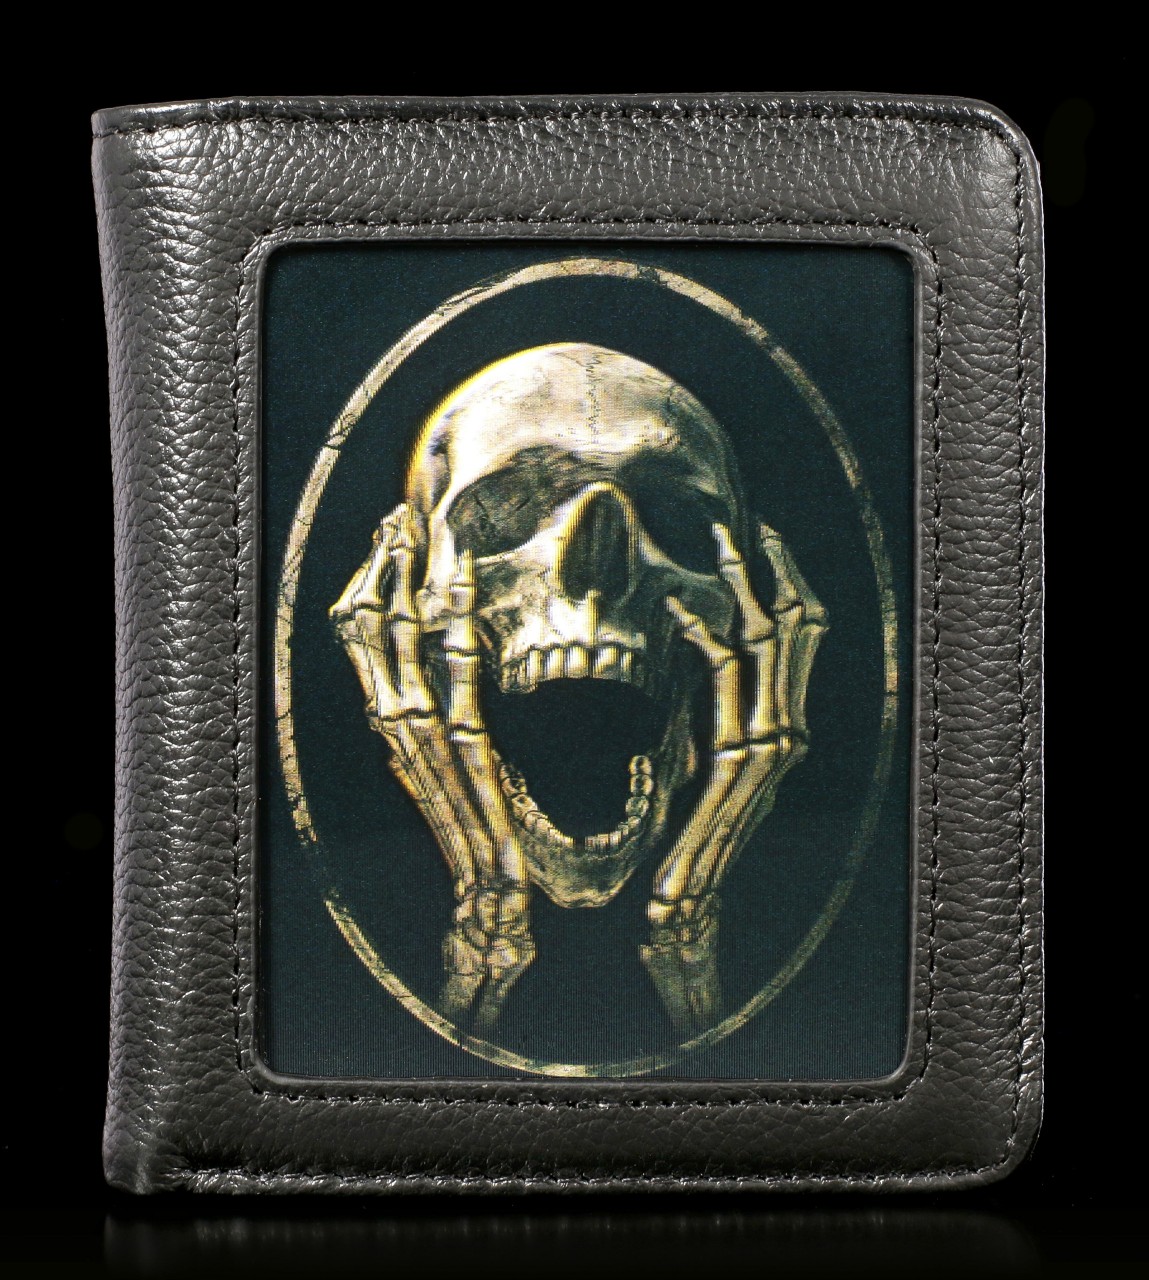 Wallet with 3D Skull - The Scream